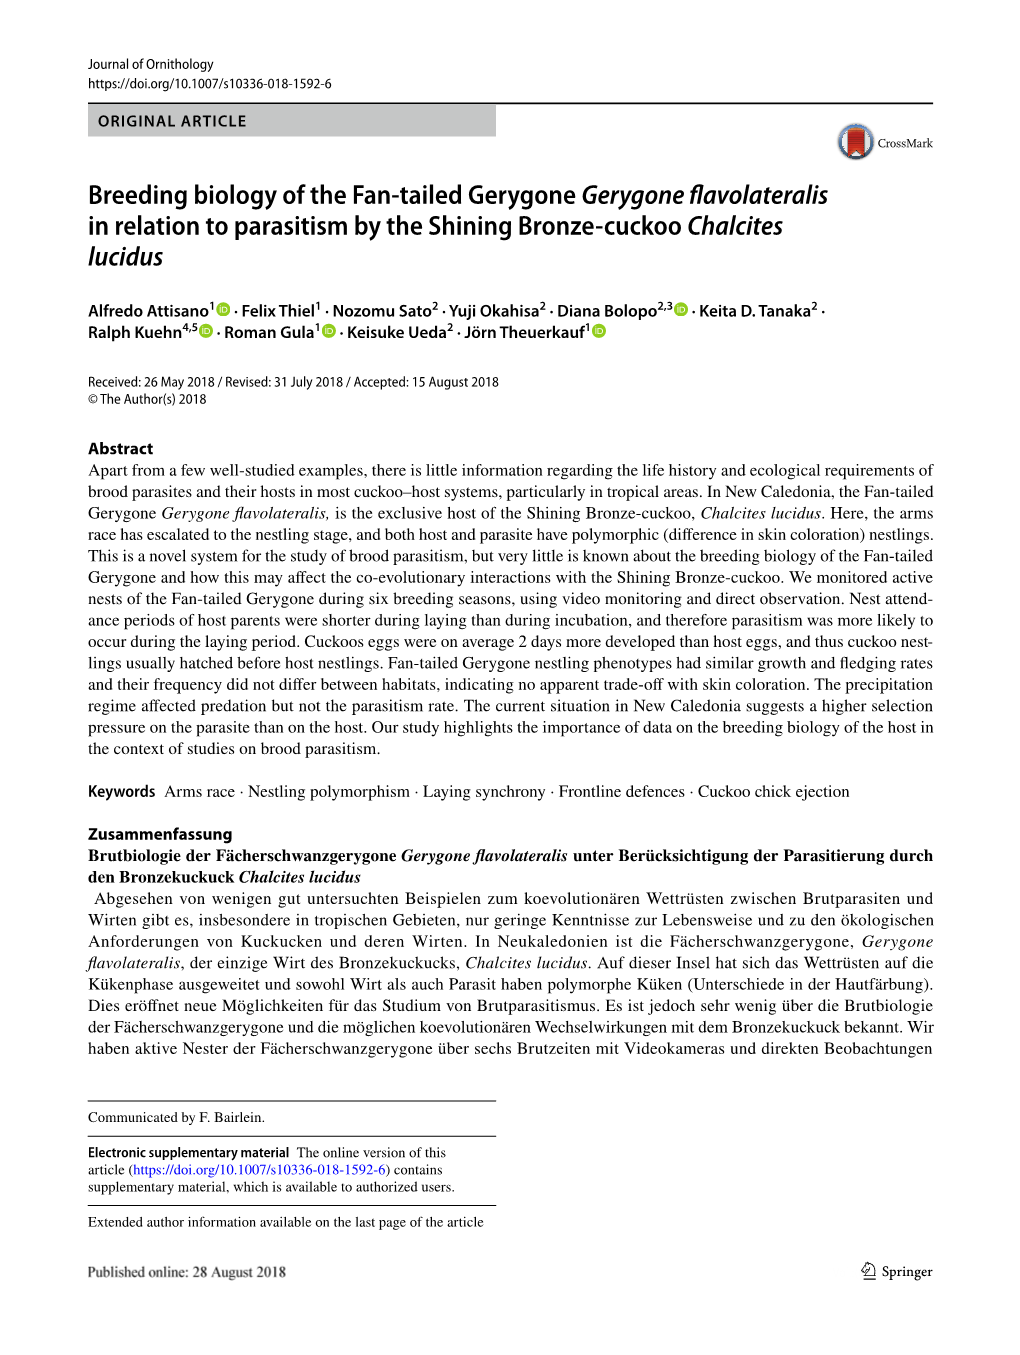 Breeding Biology of the Fan-Tailed Gerygone Gerygone Flavolateralis